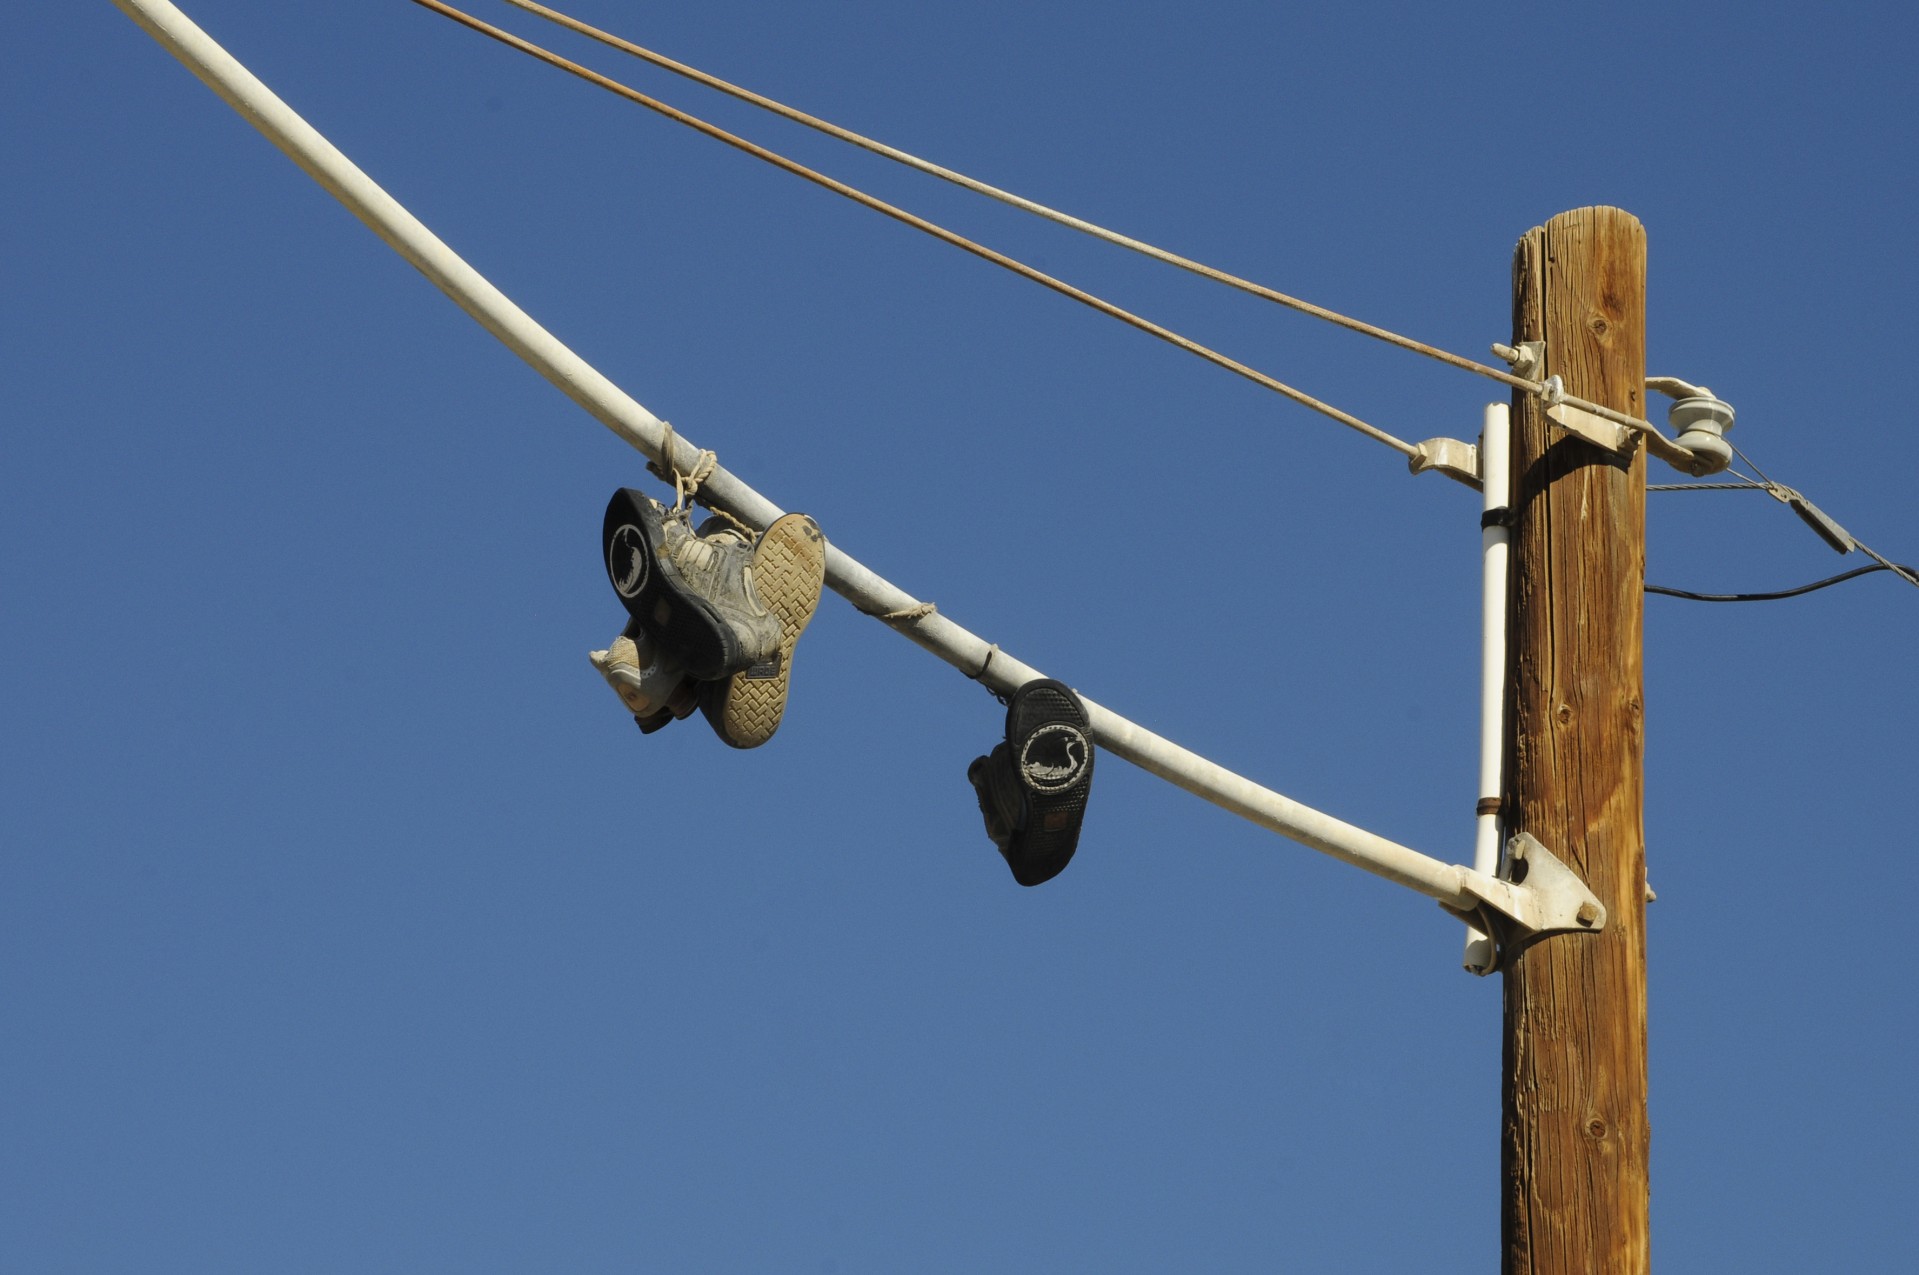 Slab City, California - shoes thrown over and now hanging from telephone pole wires